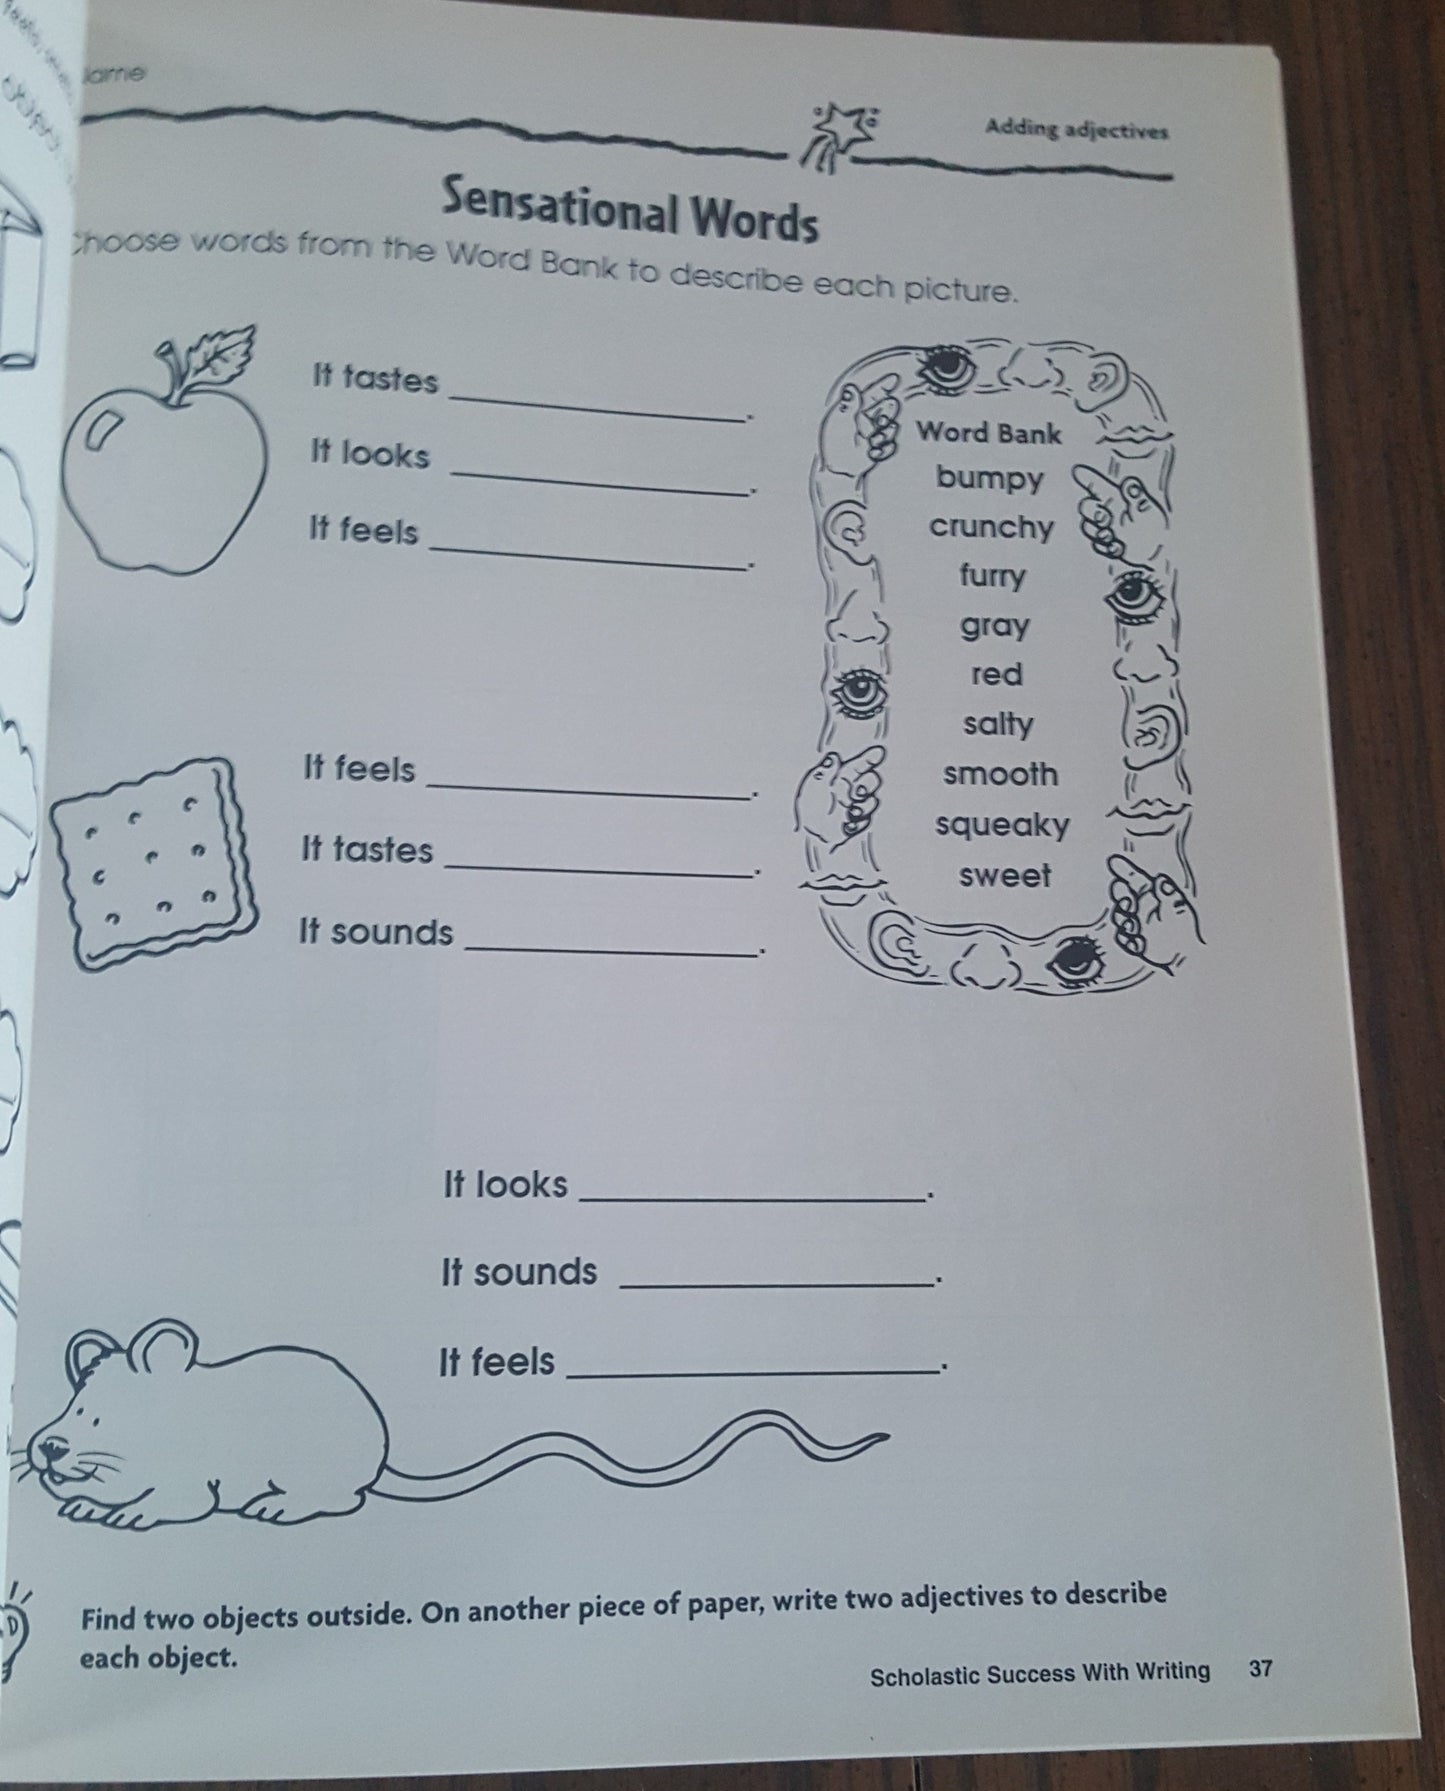 Scholastic Success with Writing Part 1